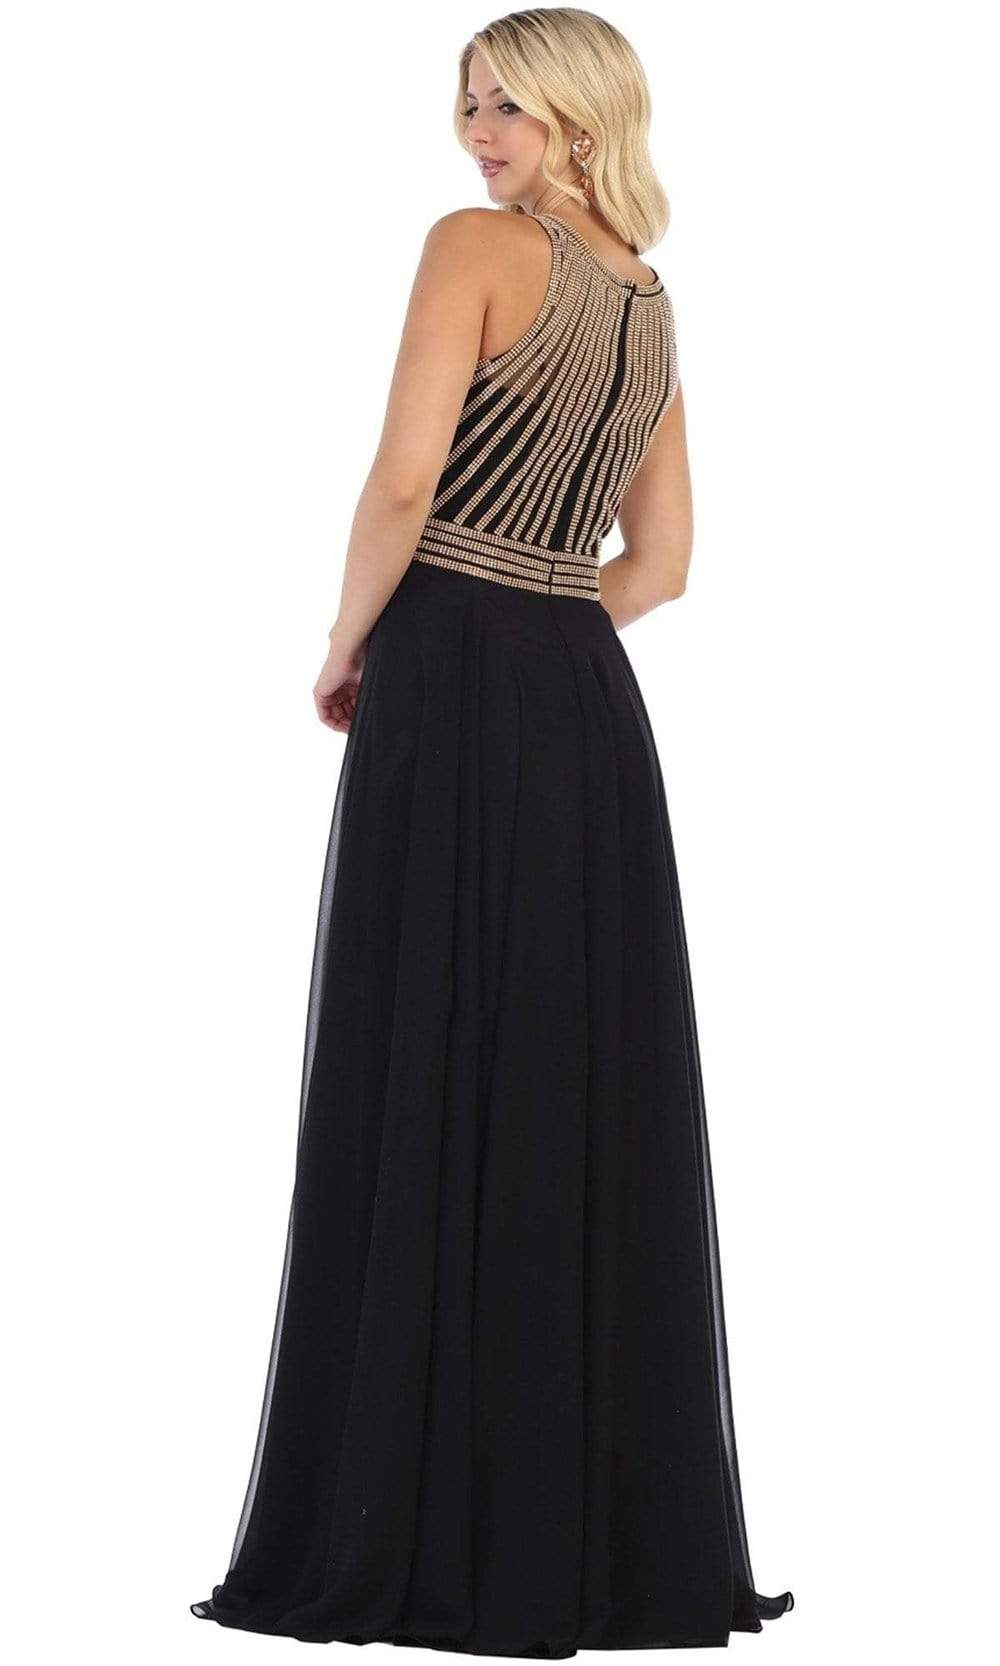 May Queen - Beaded Striped Sleeveless A-Line Dress MQ1586SC In Black and Gold